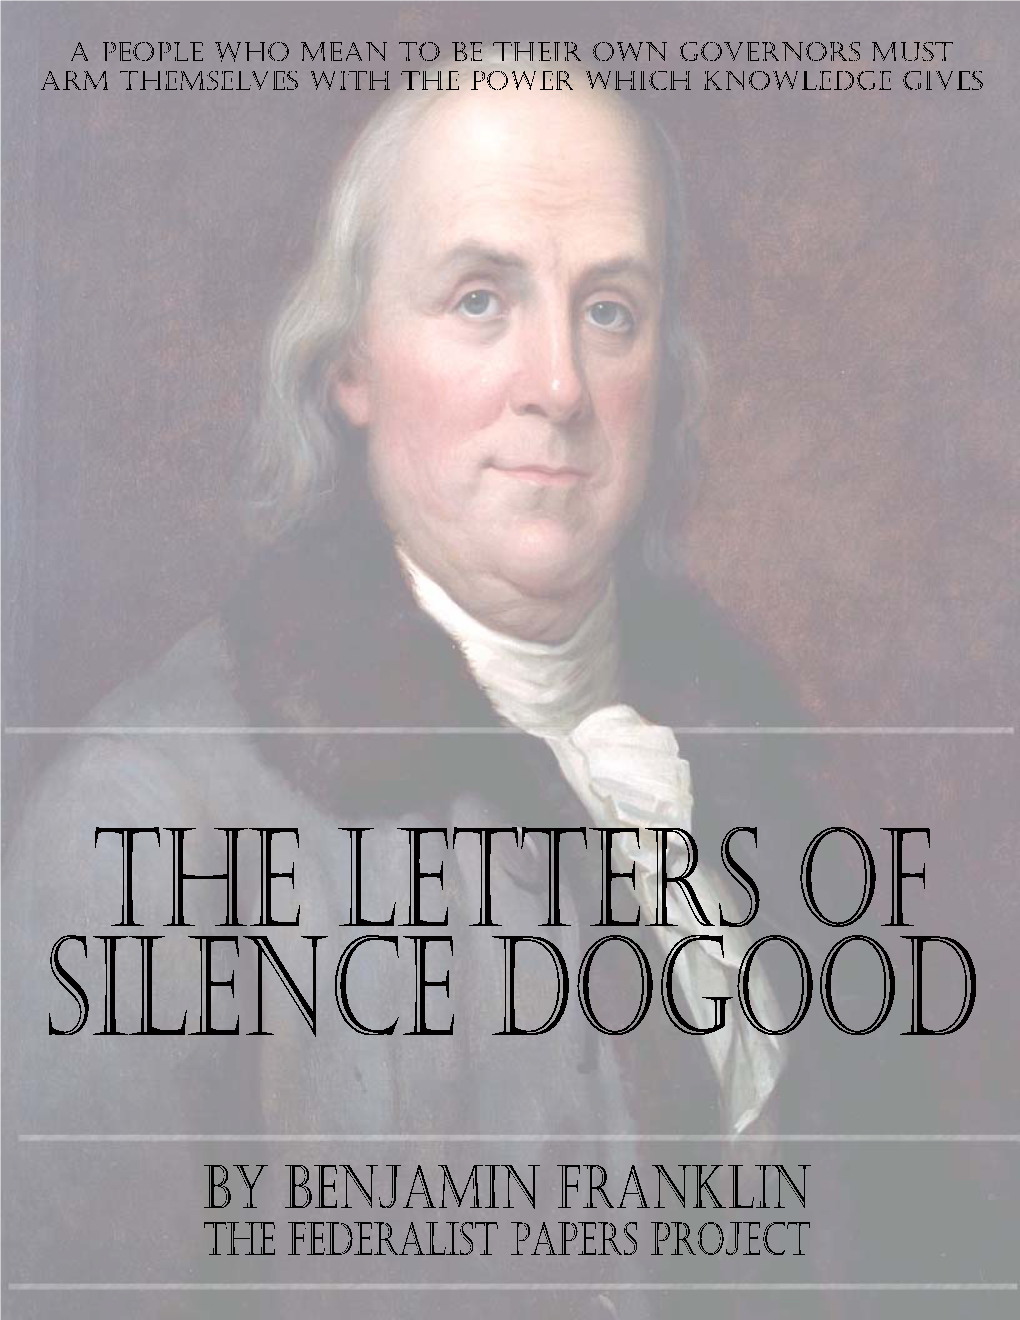 Silence Dogood Letters